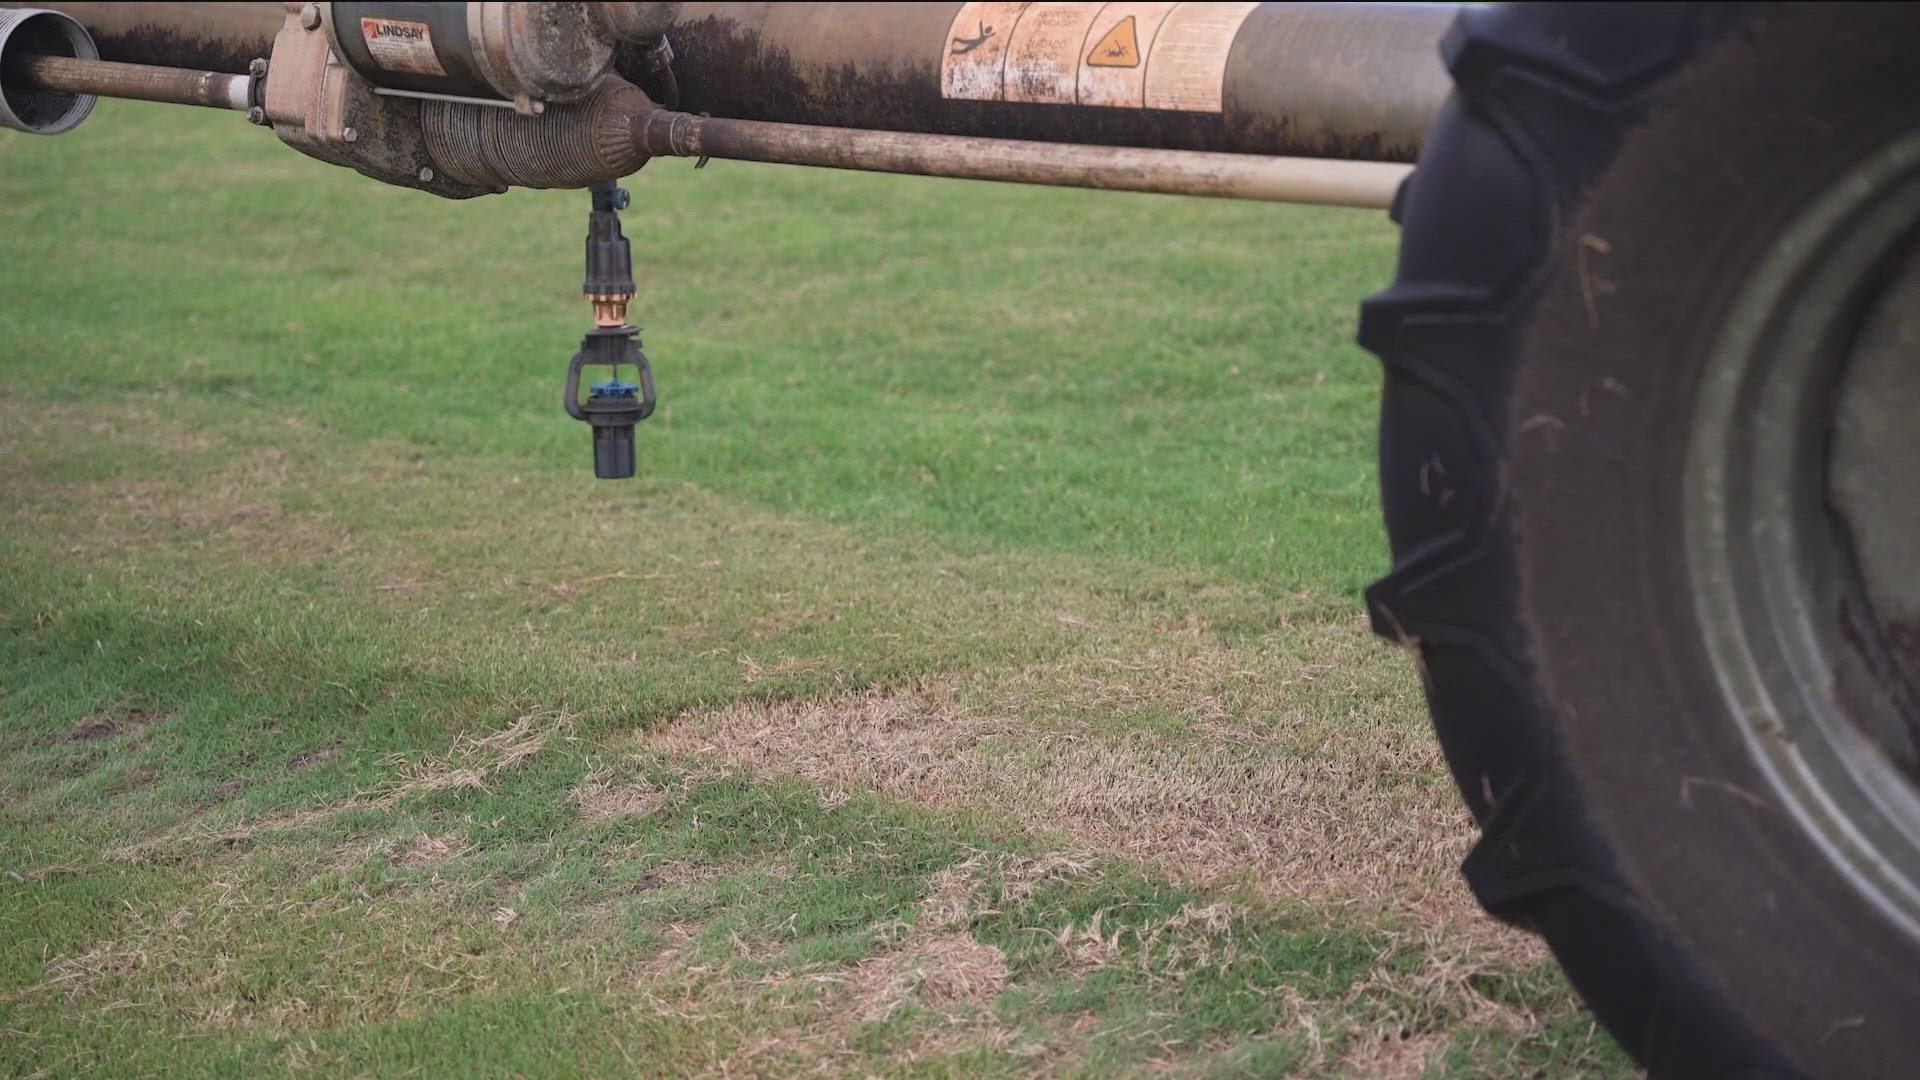 The KVUE Defenders found companies pulling water from aquifers outside their customer bases, impacting ranchers.